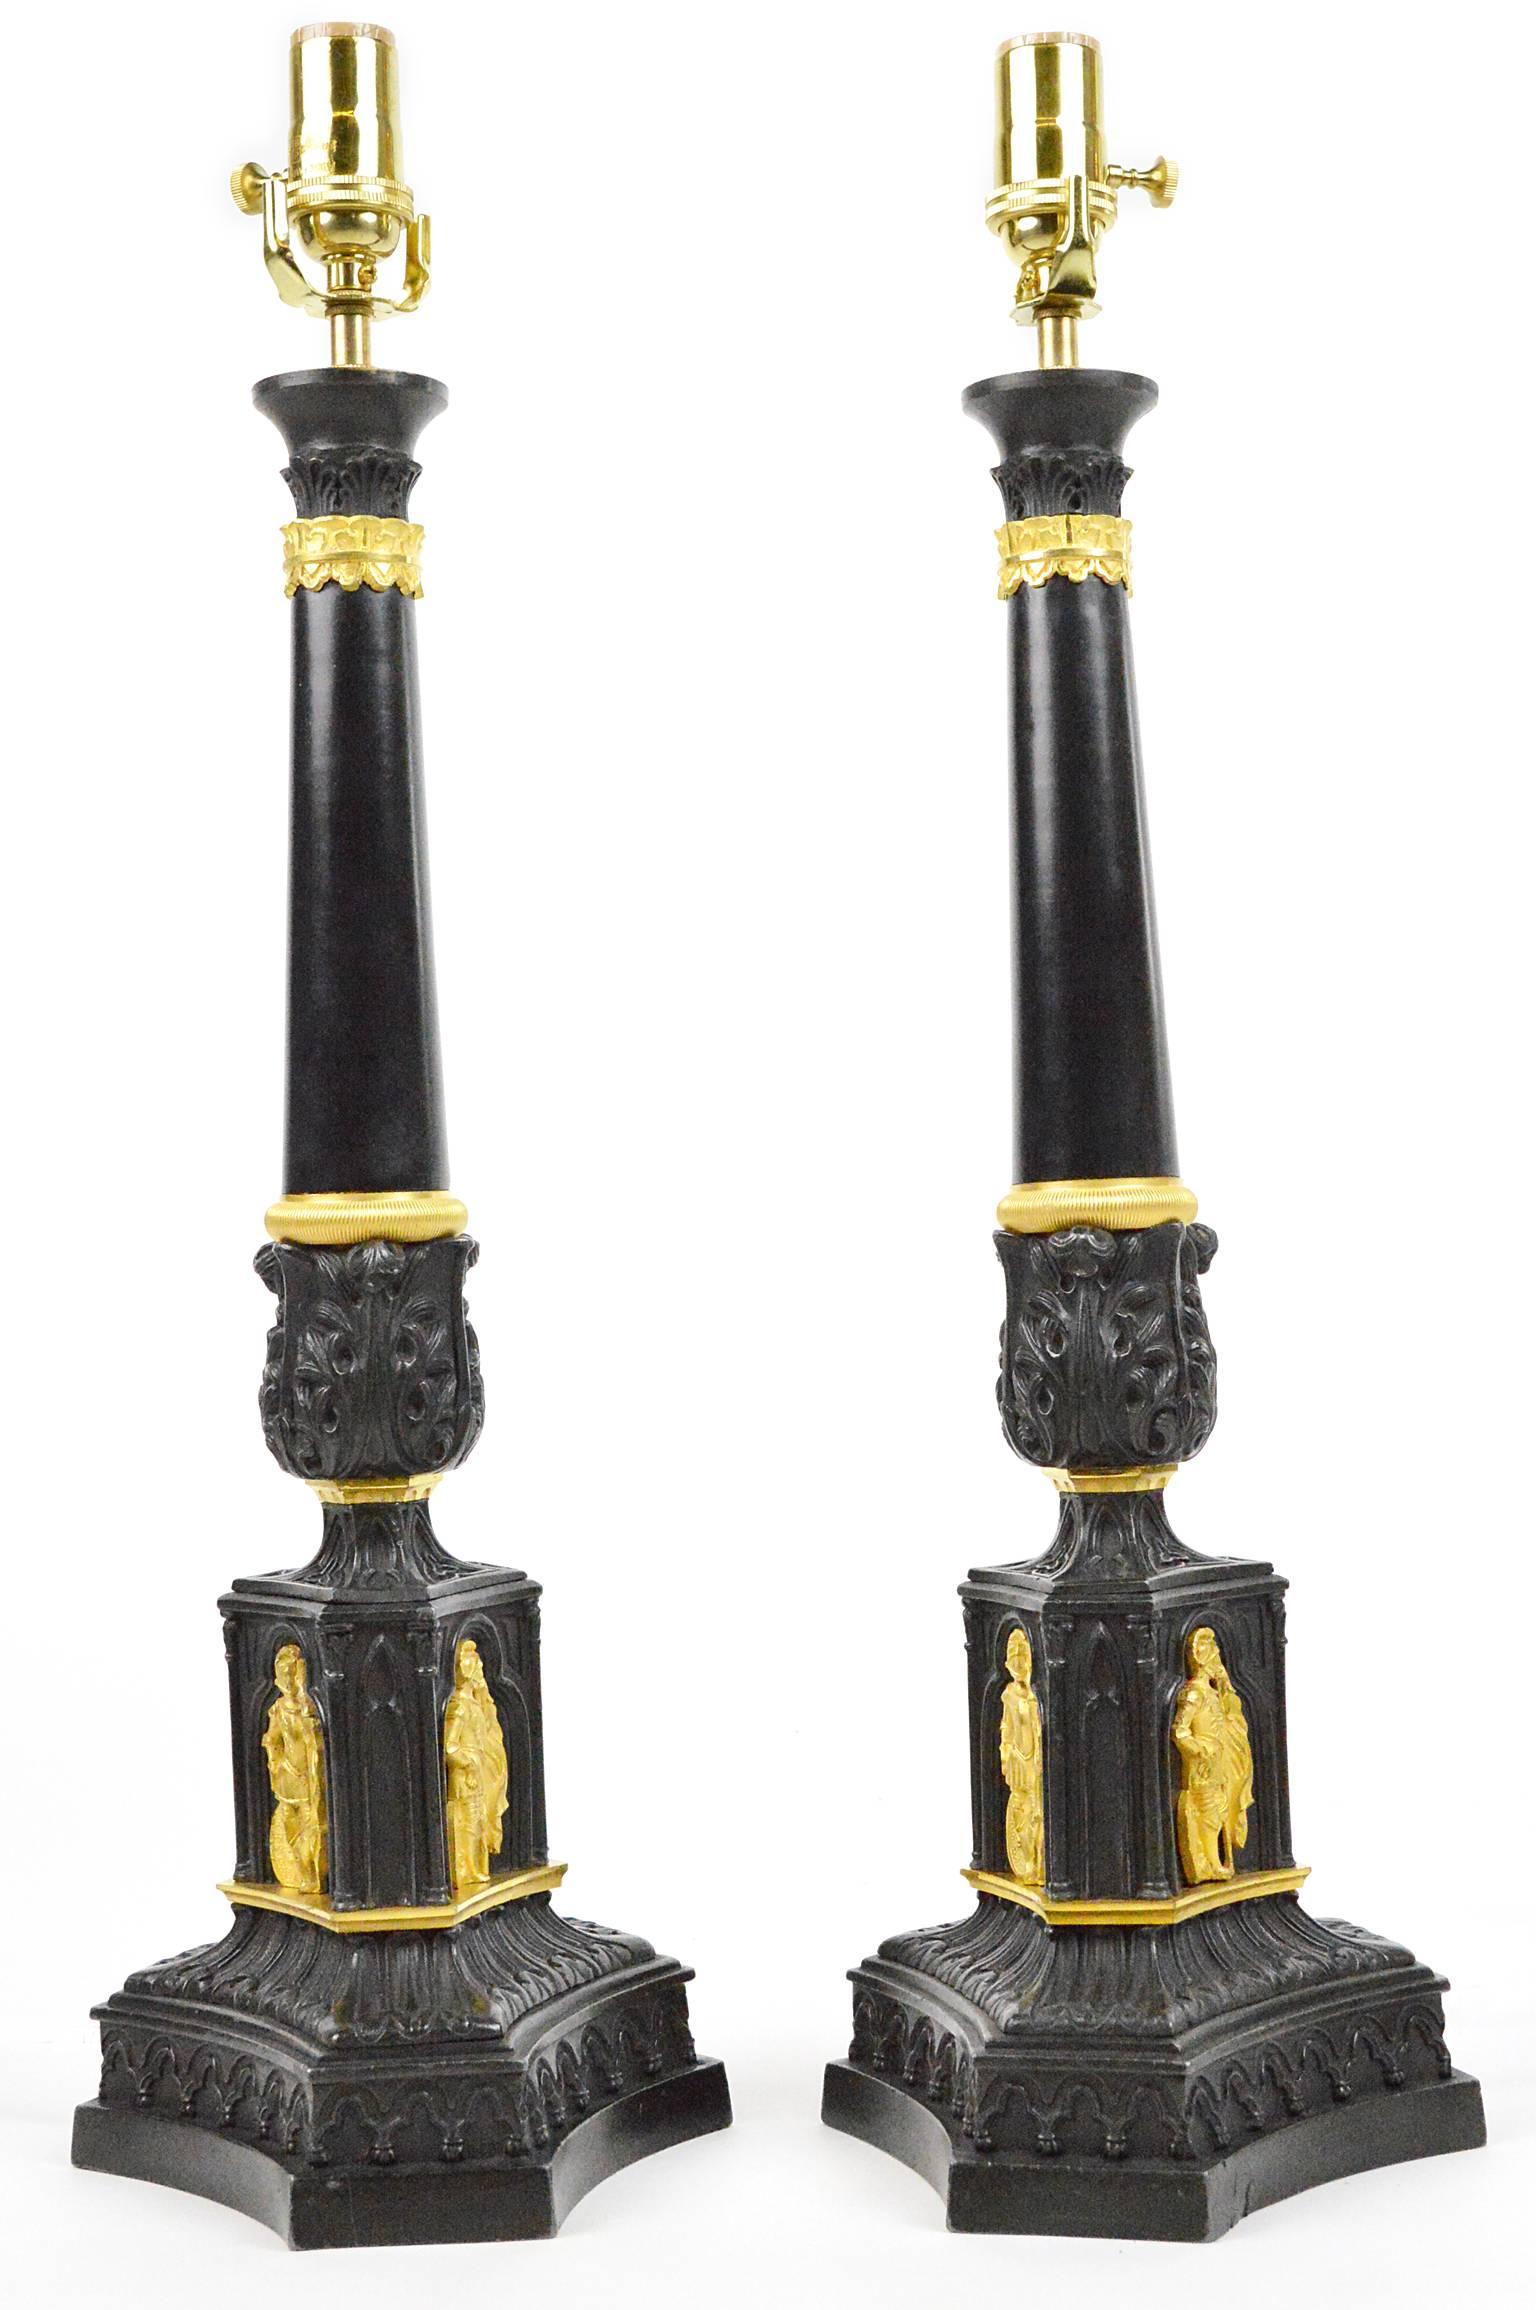 Pair French Empire patinated gilt bronze mounted column lamps with gilt figurals on tripartite base.
23.75